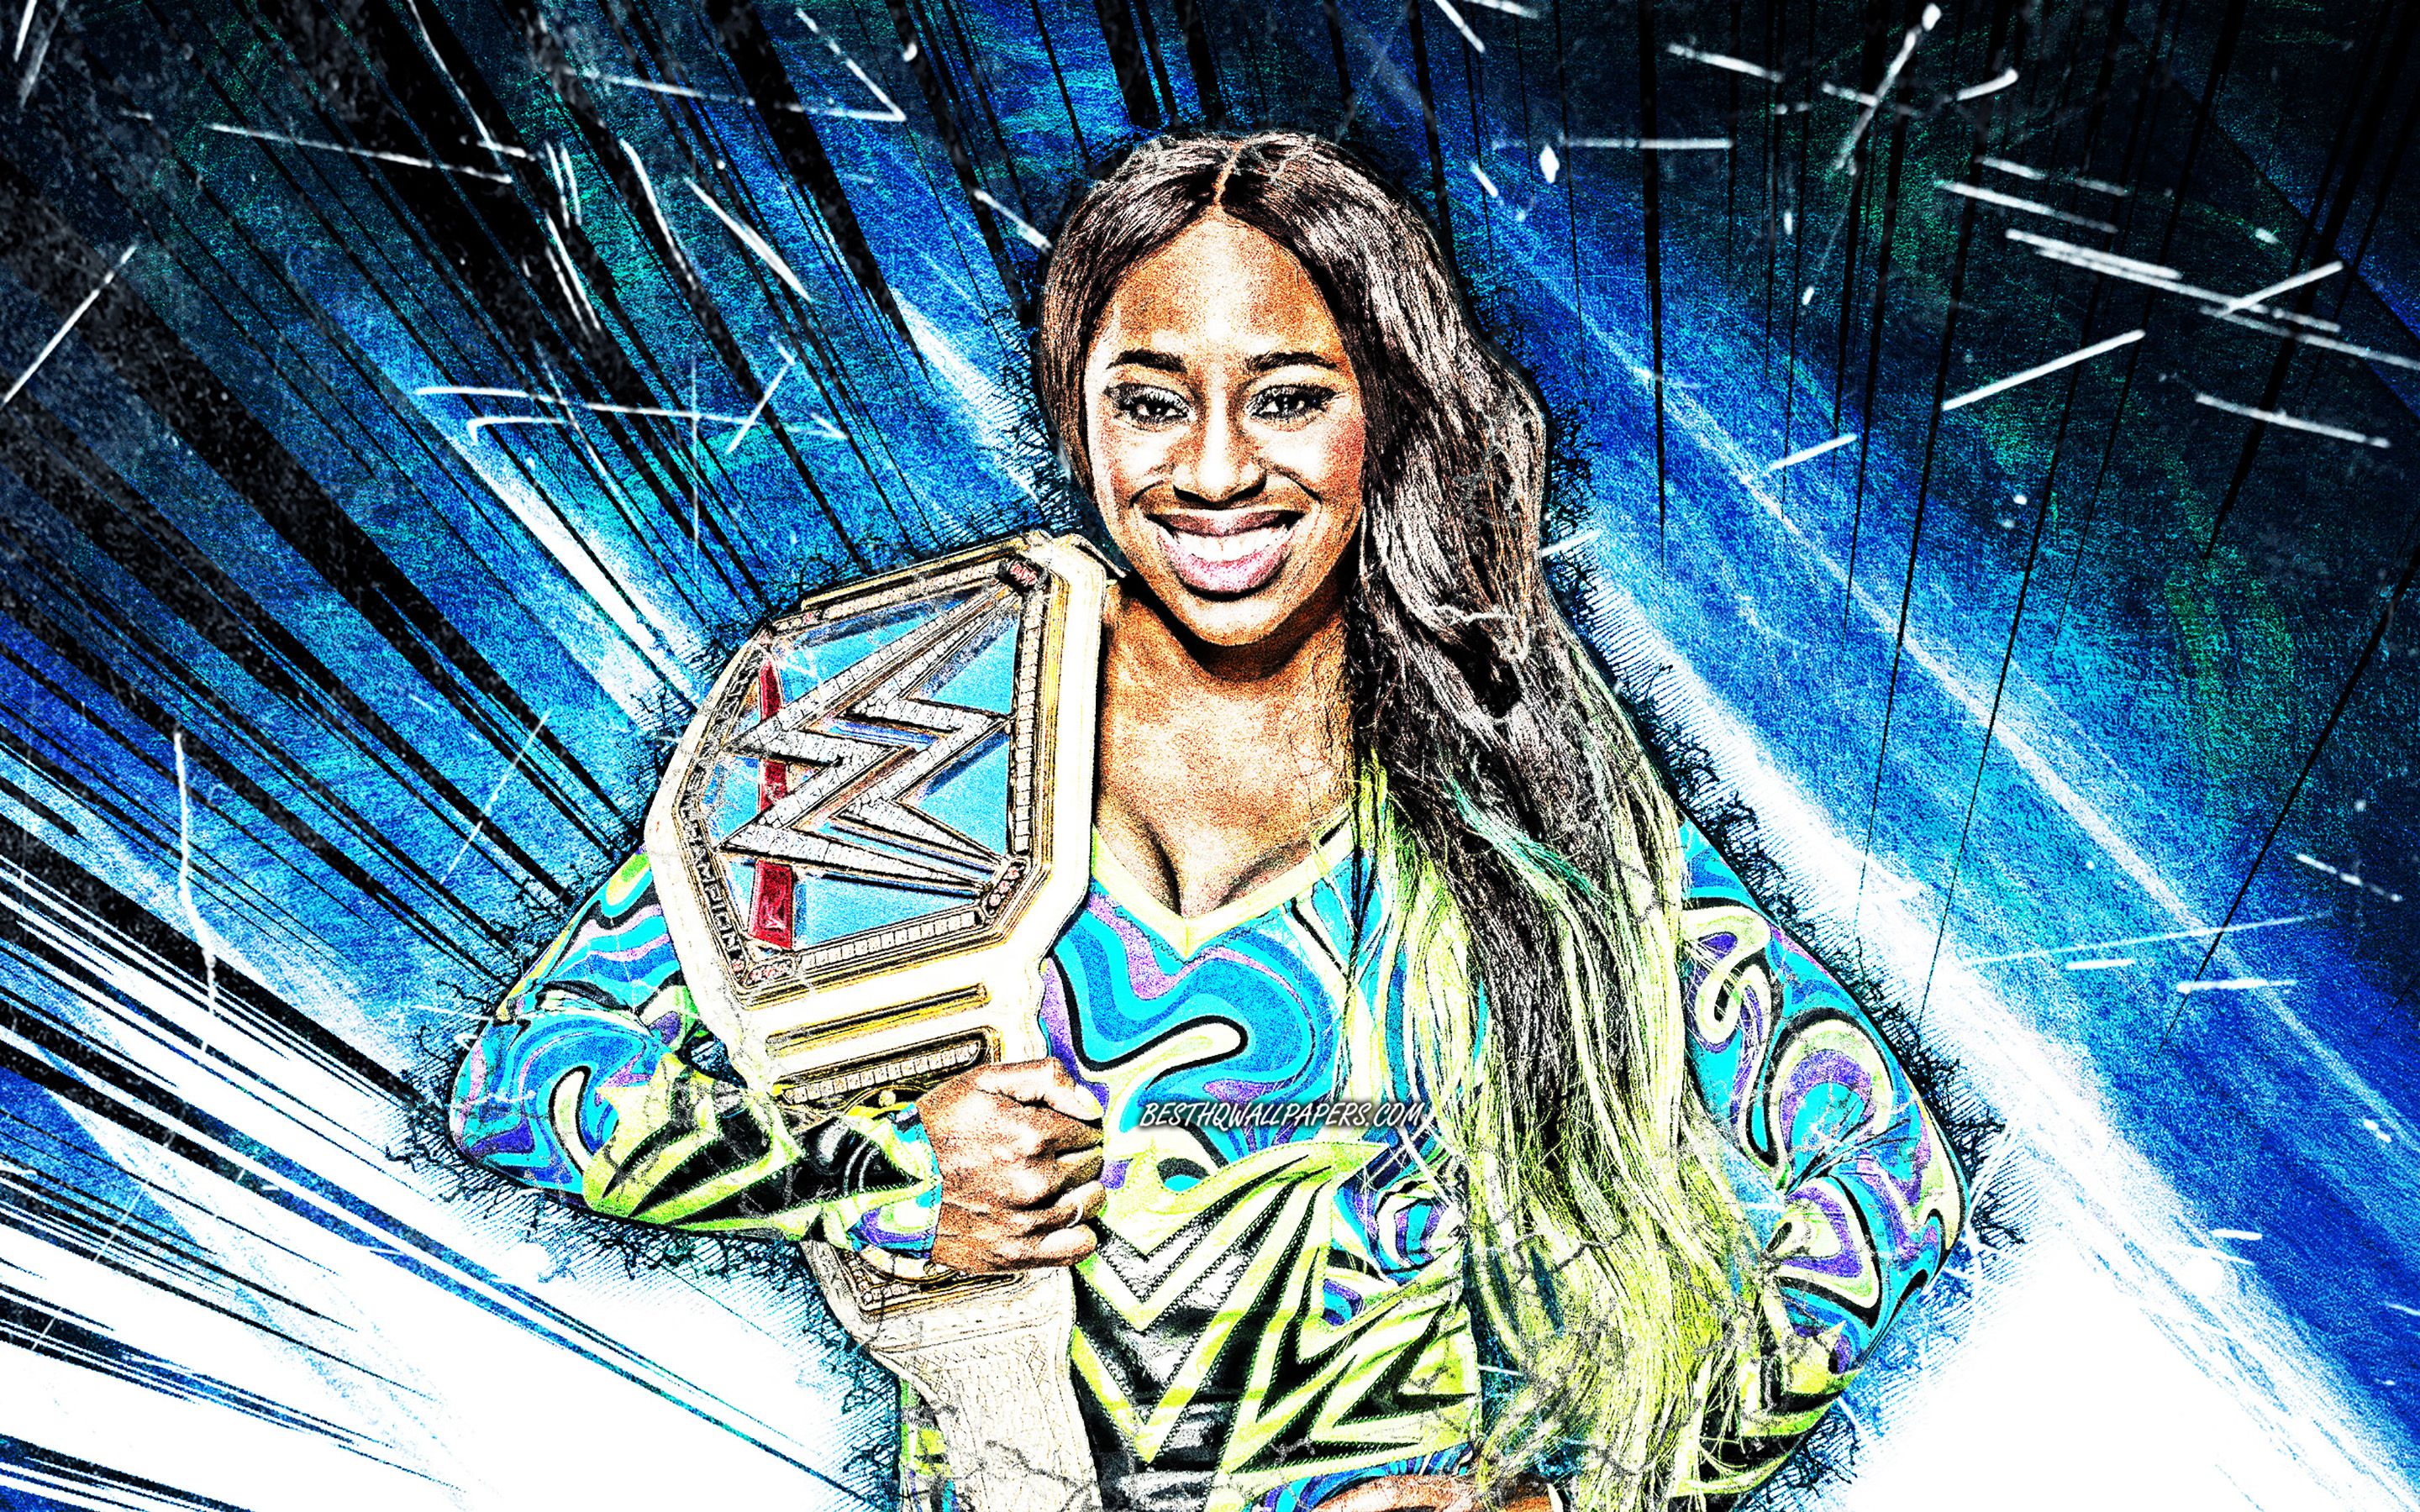 Download wallpaper Naomi, WWE, grunge art, american wrestlers, wrestling, Trinity Fatu, female wrestlers, blue abstract rays, wrestlers for desktop with resolution 2880x1800. High Quality HD picture wallpaper